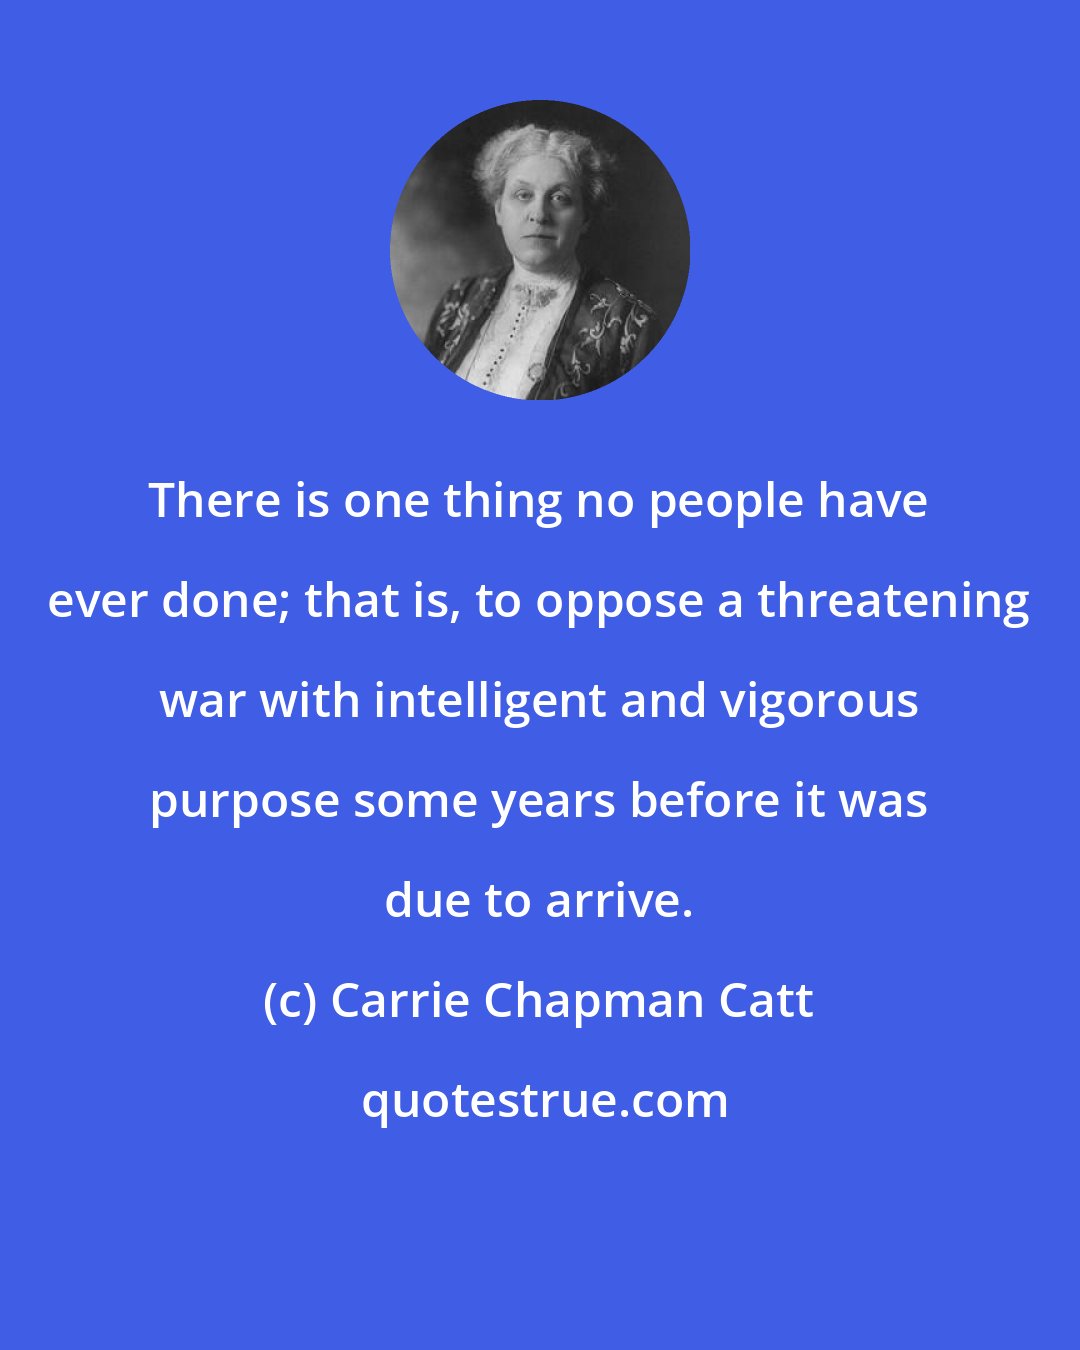 Carrie Chapman Catt: There is one thing no people have ever done; that is, to oppose a threatening war with intelligent and vigorous purpose some years before it was due to arrive.